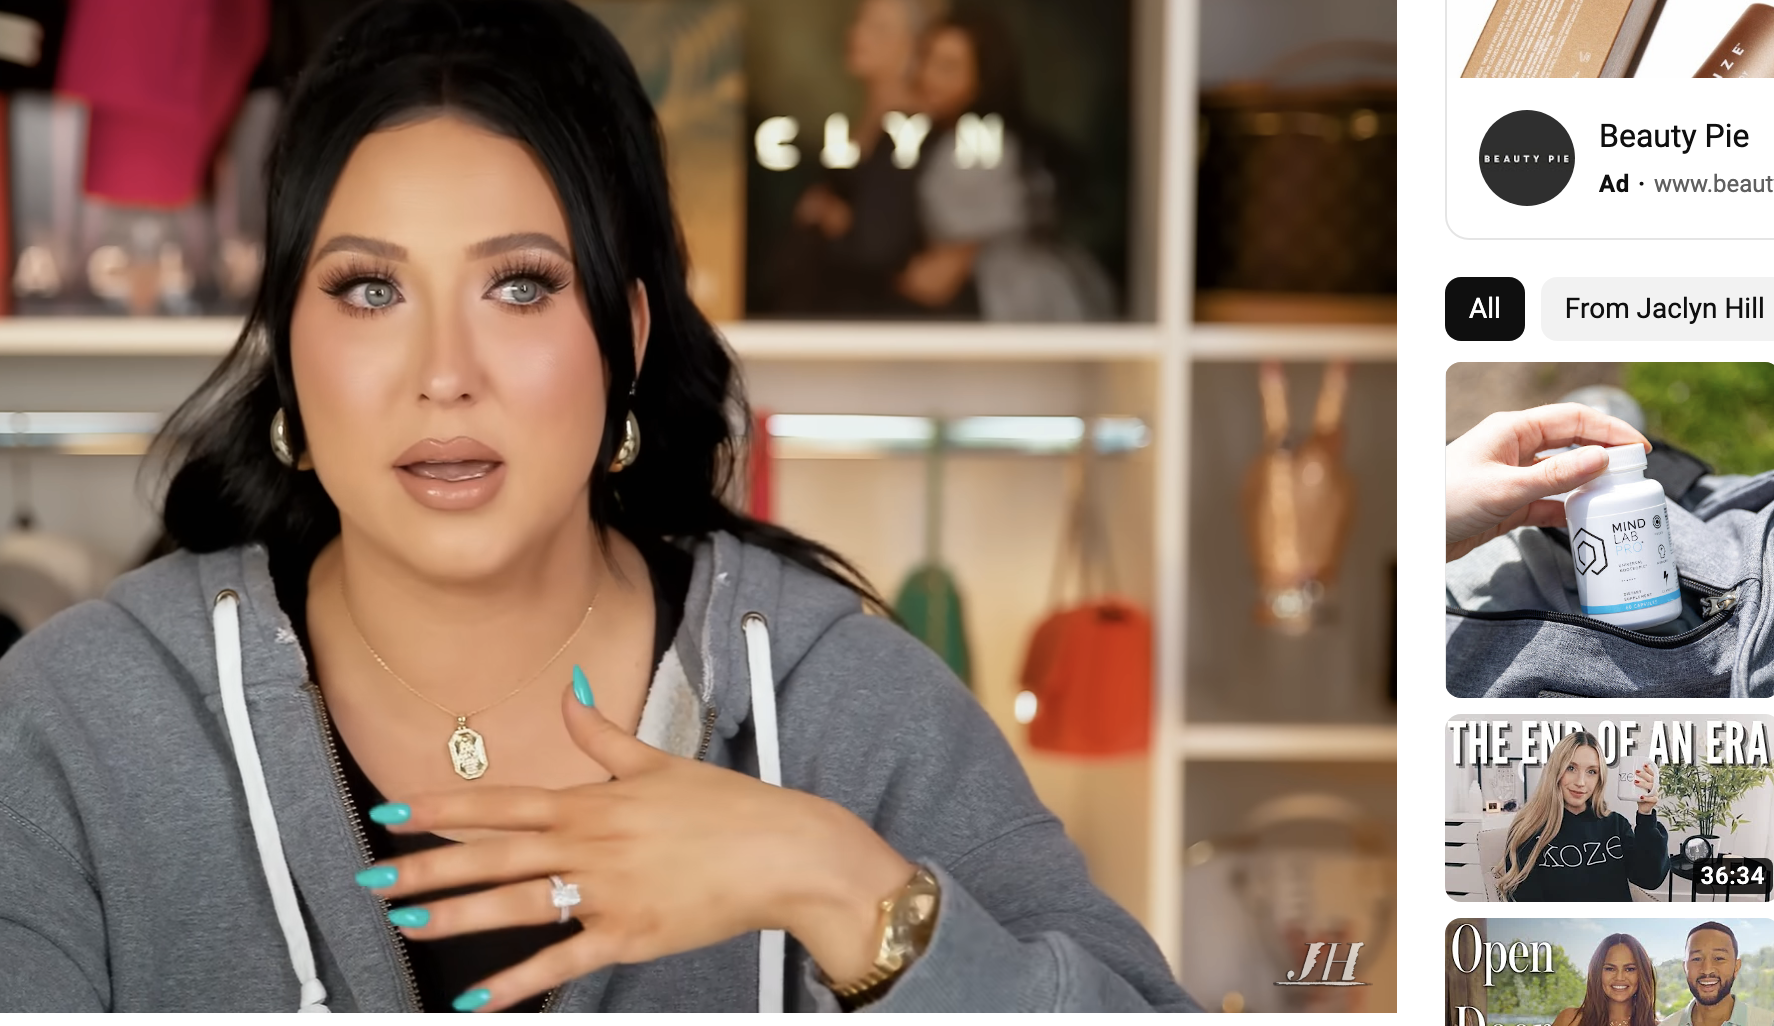 Closeup of Jaclyn Hill holding tissue in her hands